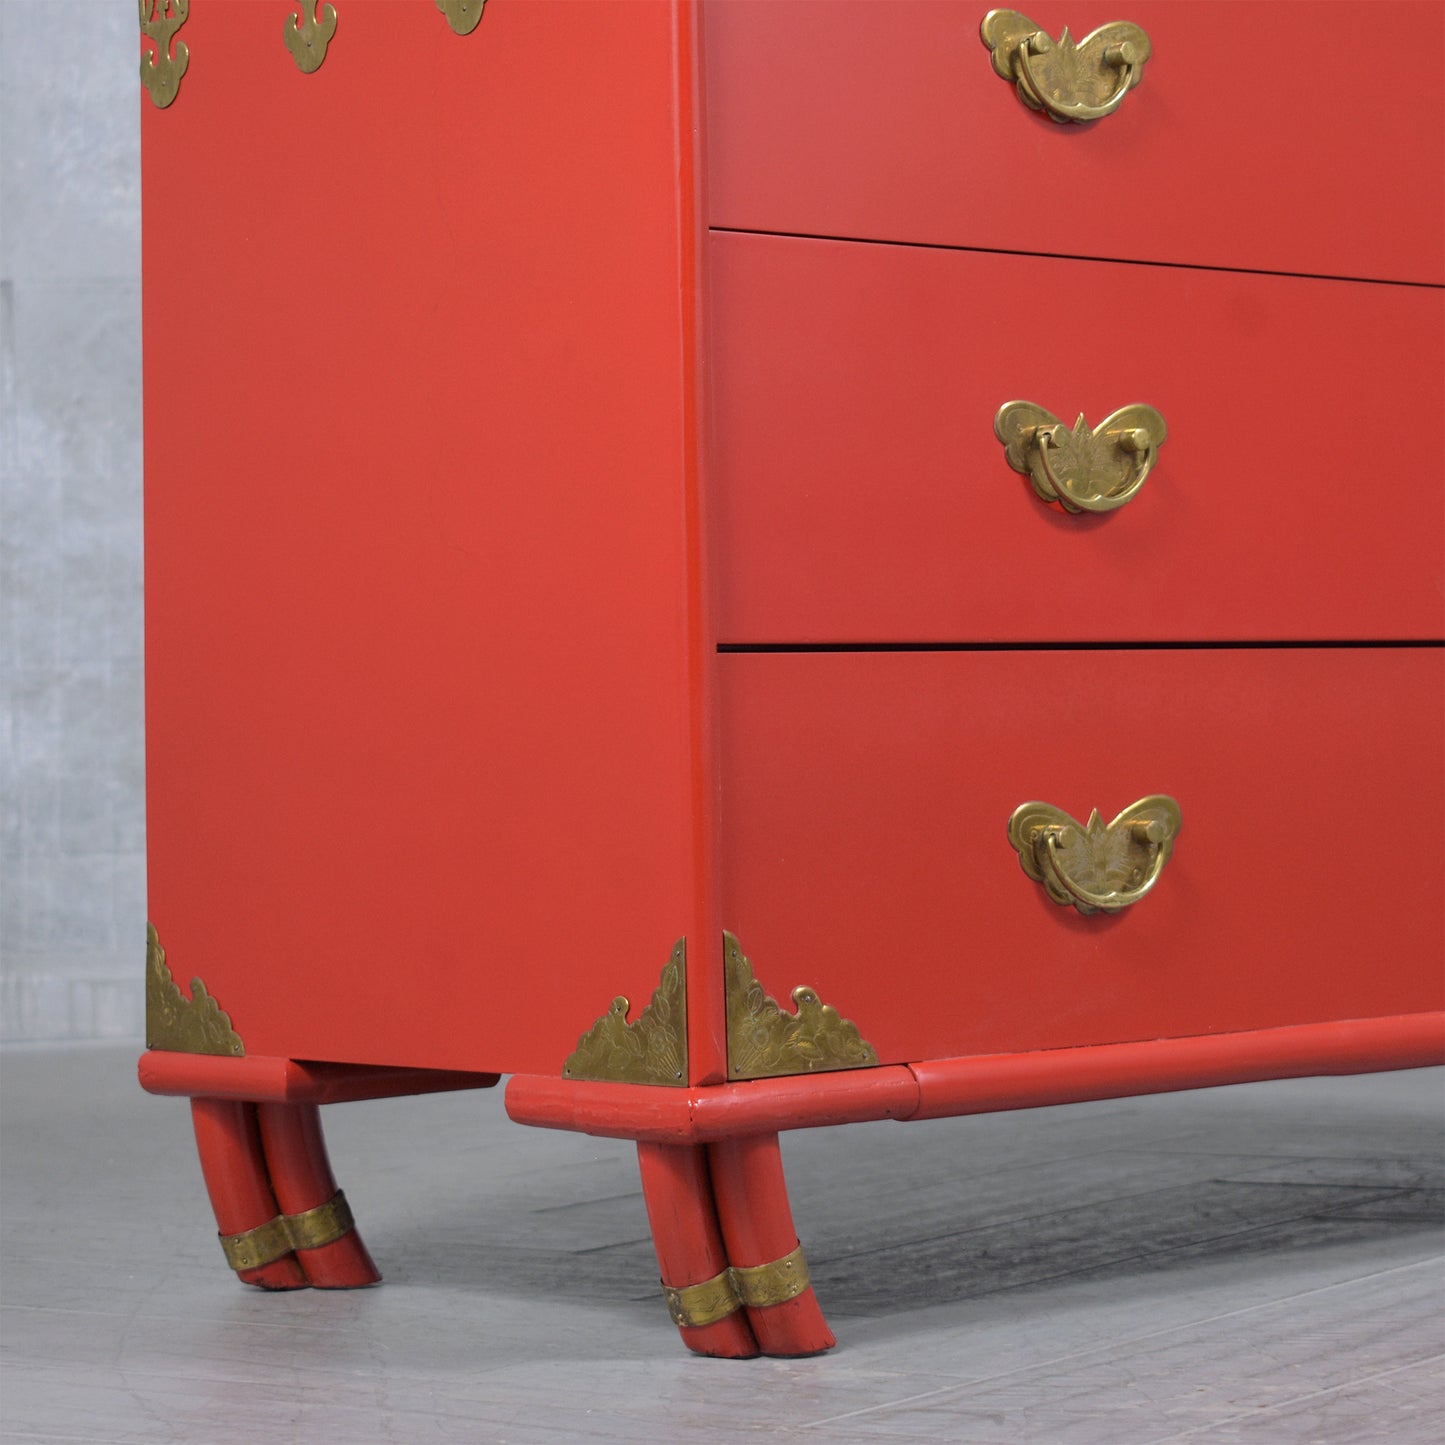 Red 1970s Vintage Chest of Drawers